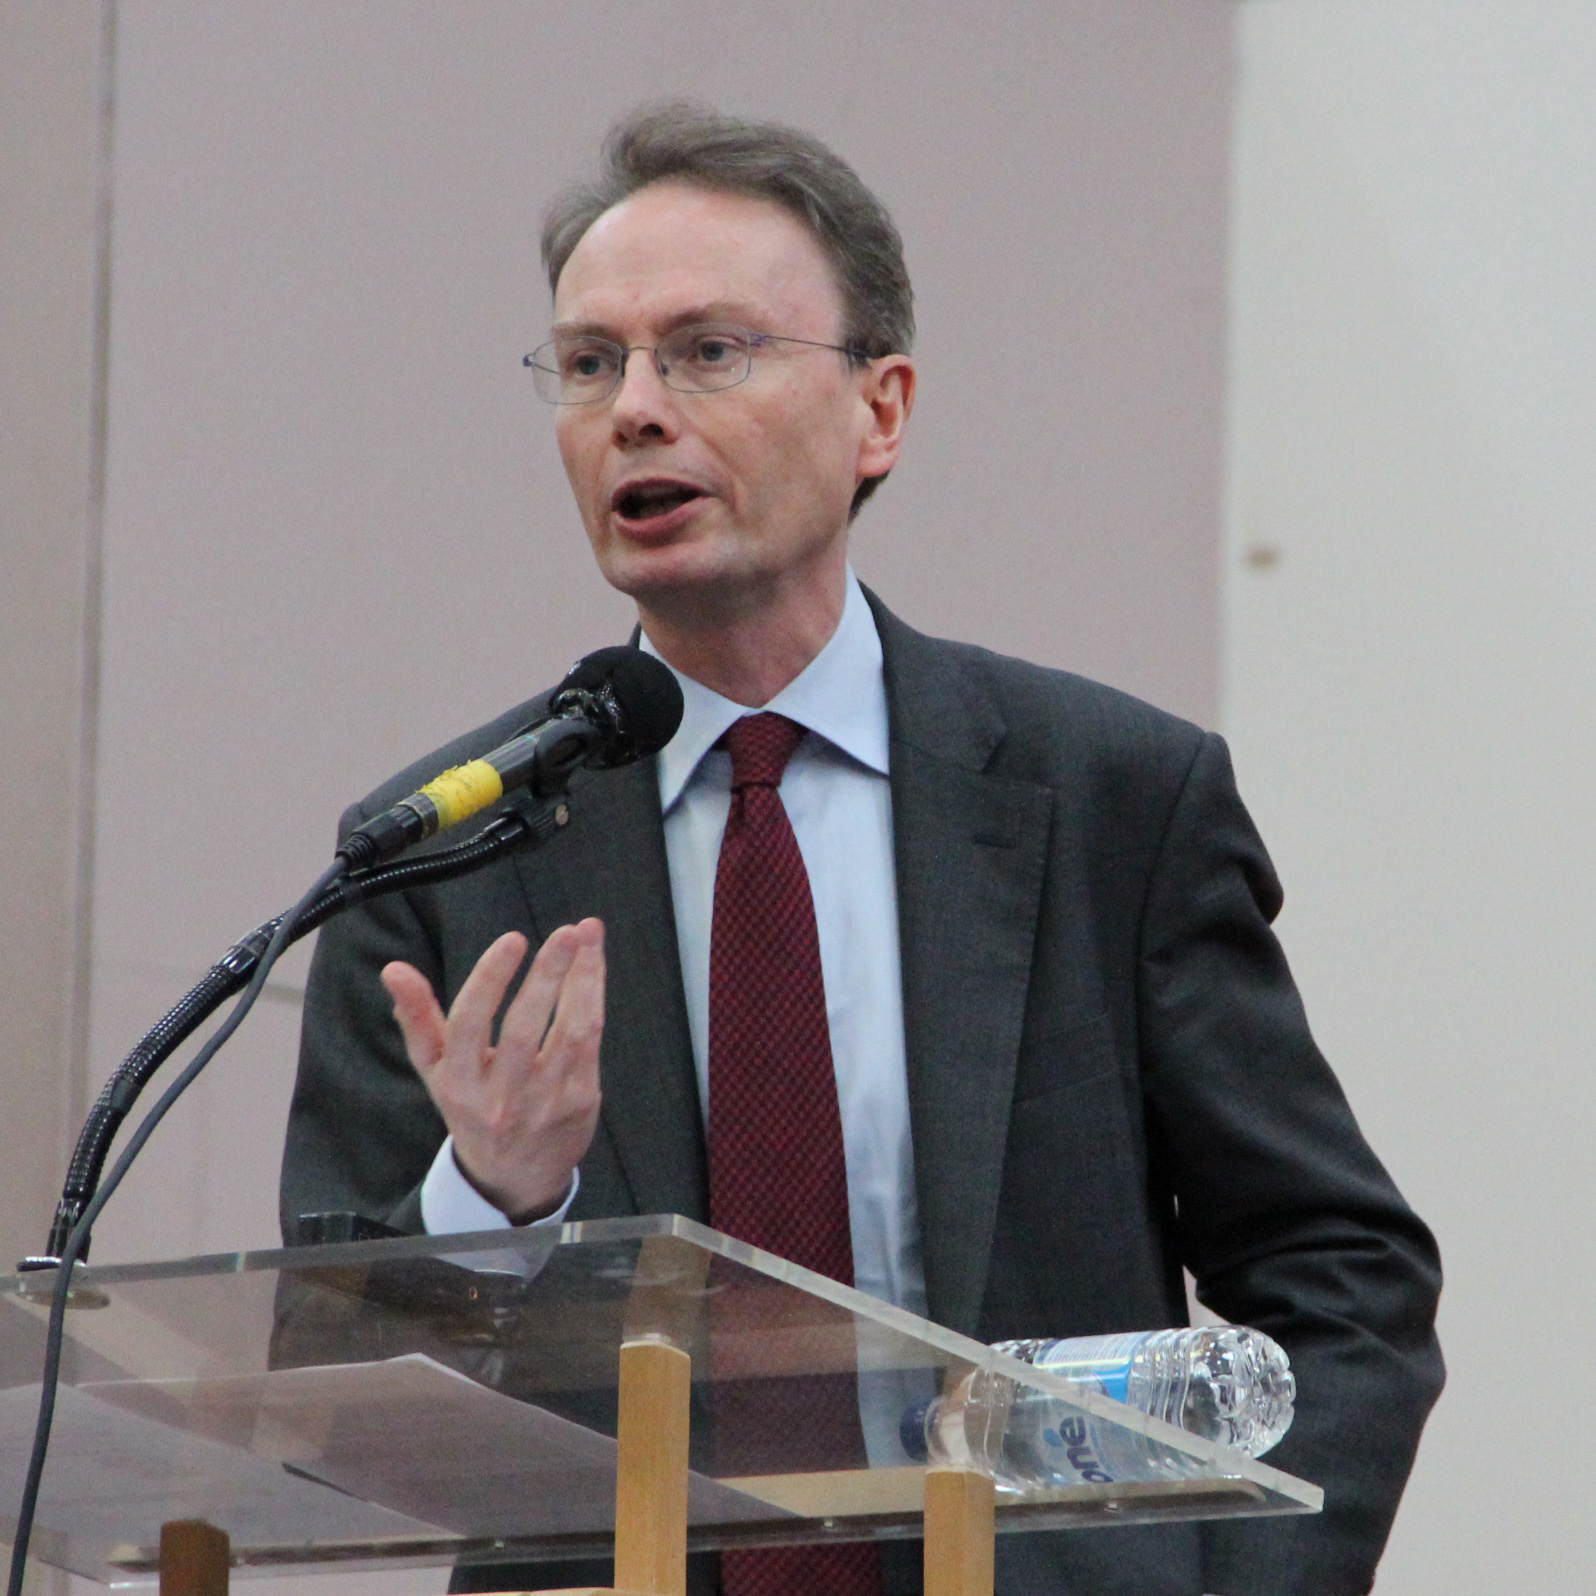 Professor Thomas Pink of King's College London speaks on ‘Church and state after Vatican II’ at the 2014 LMS Conference